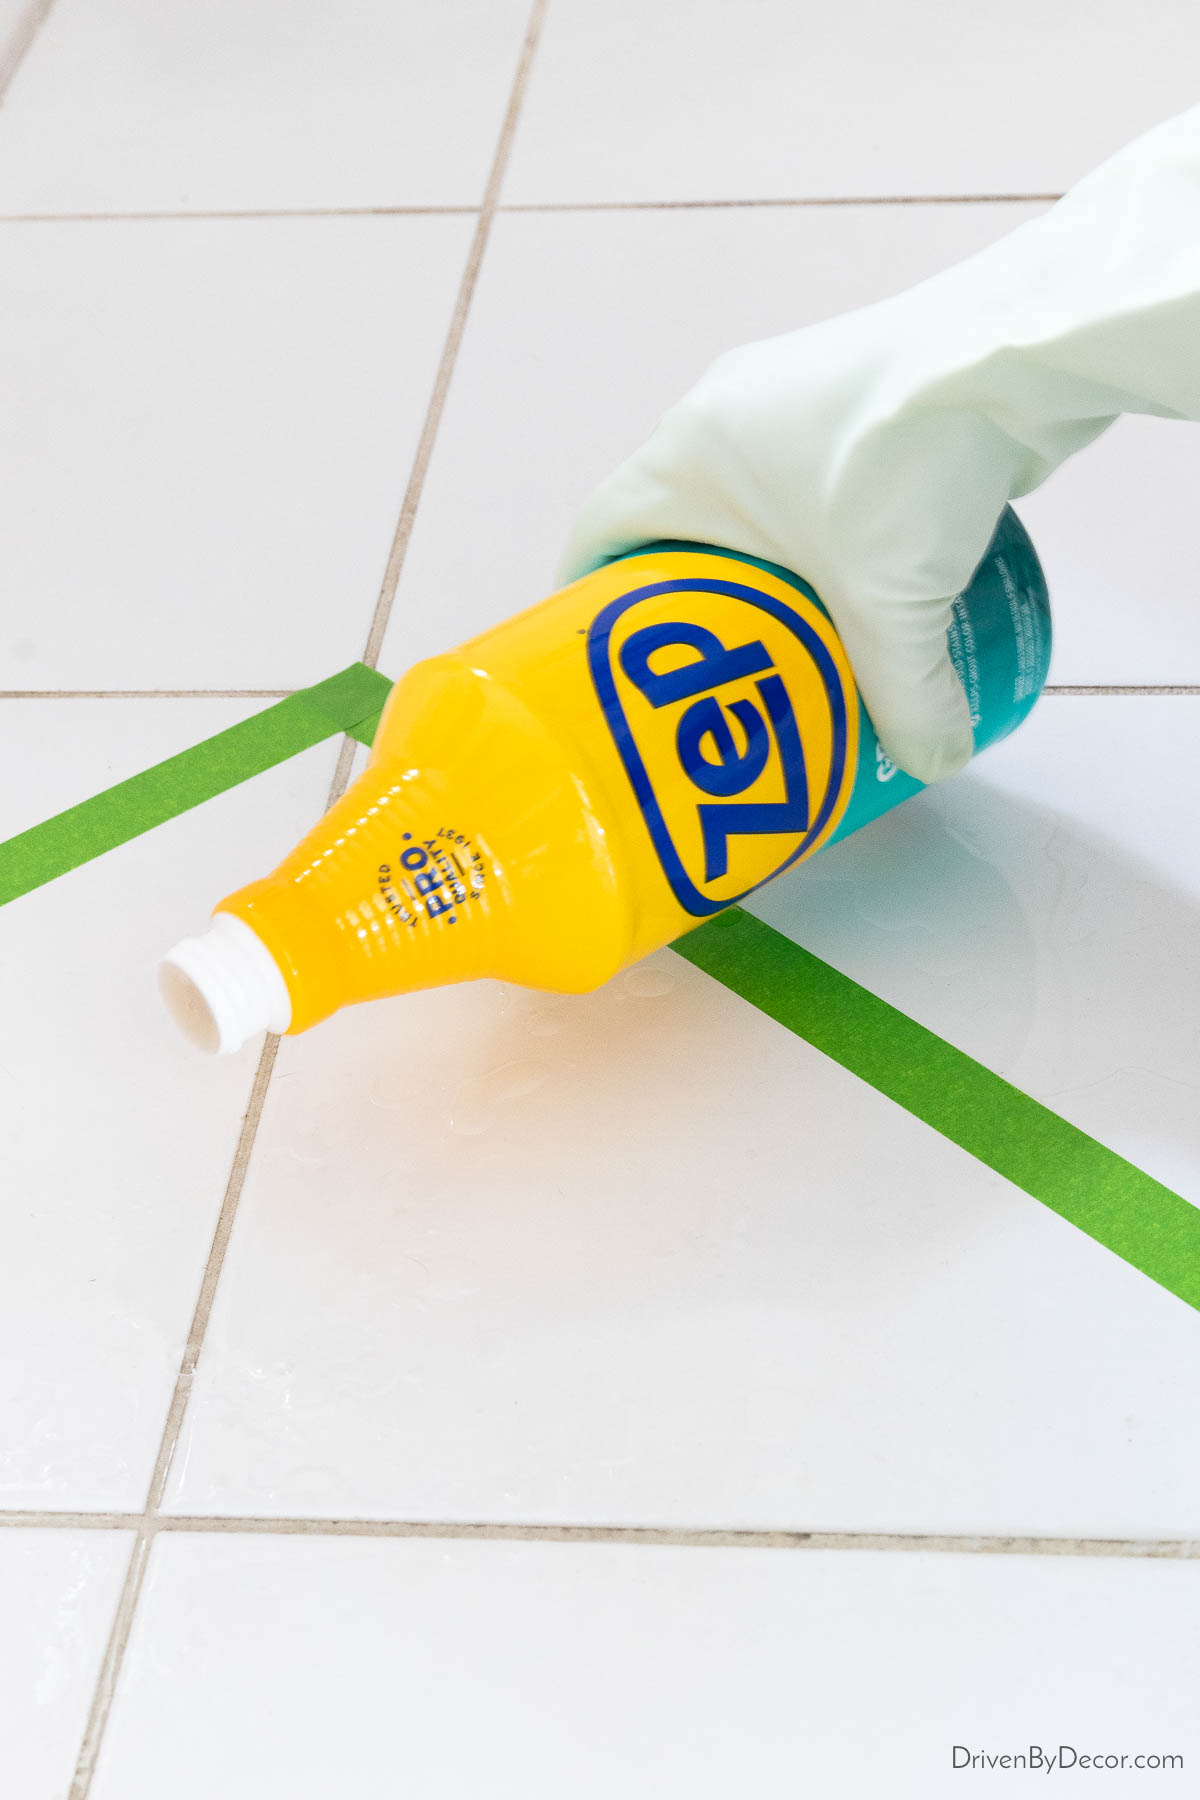 Pouring Zep grout cleaner onto grout